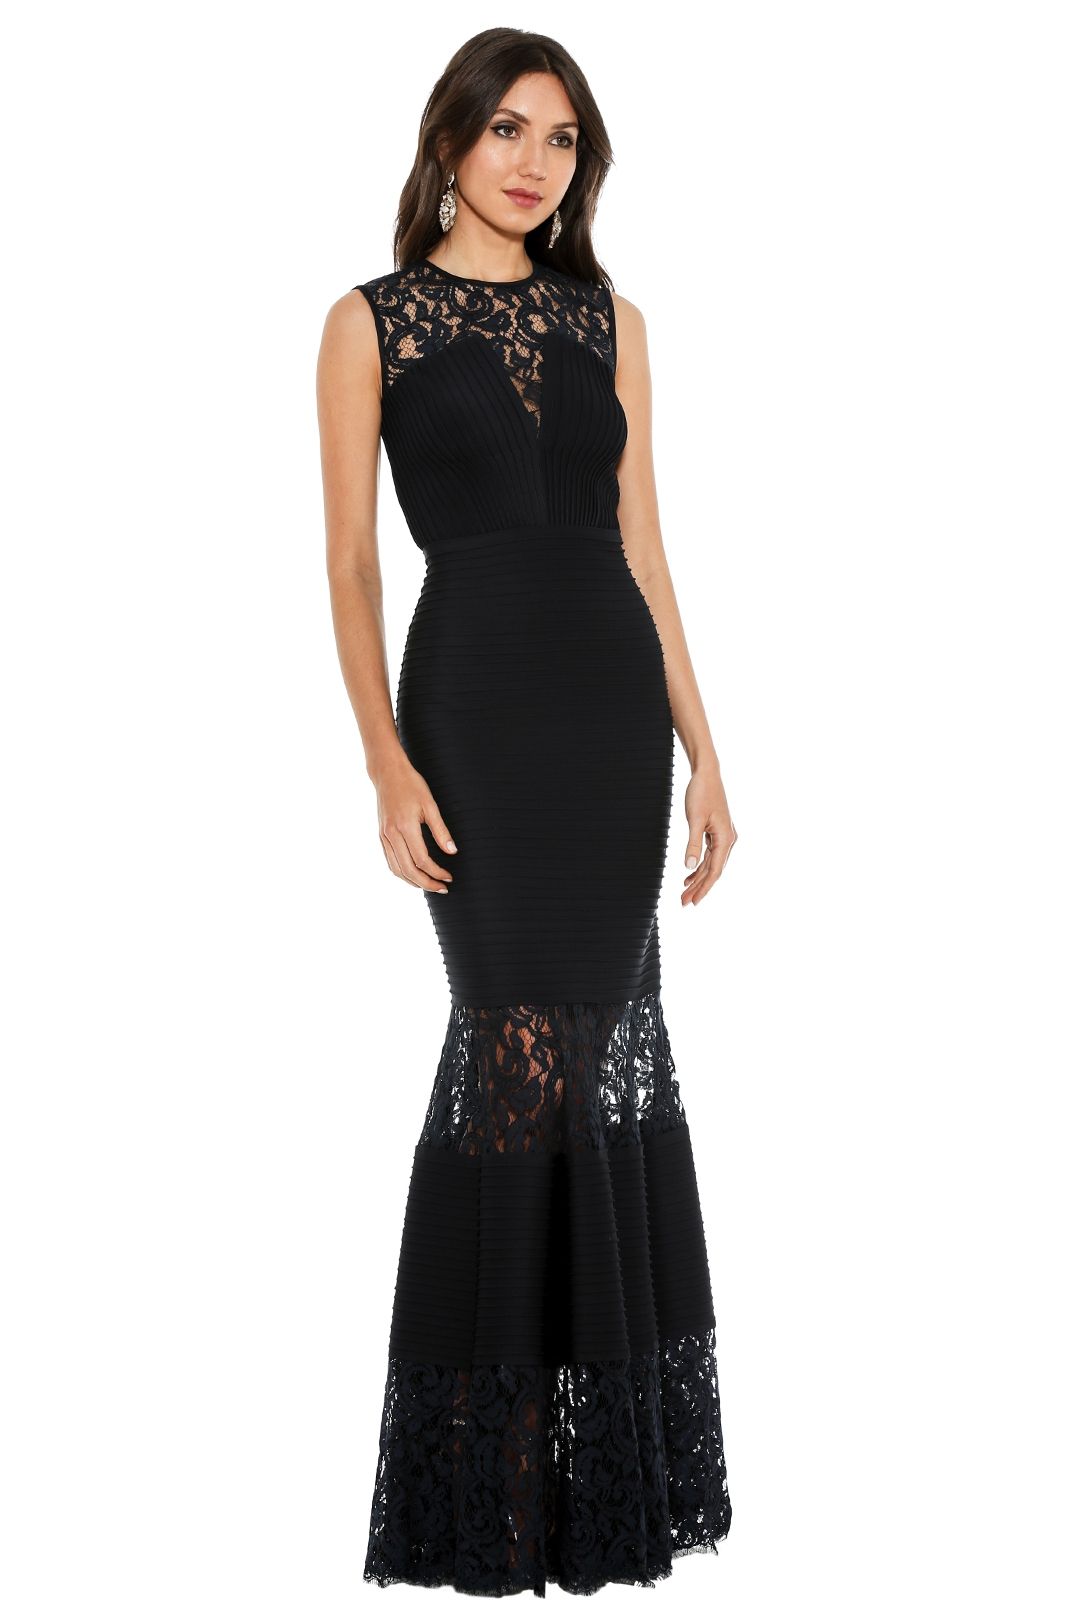 Pintuck Neoprene Lace Illusion Gown by Tadashi Shoji for Rent